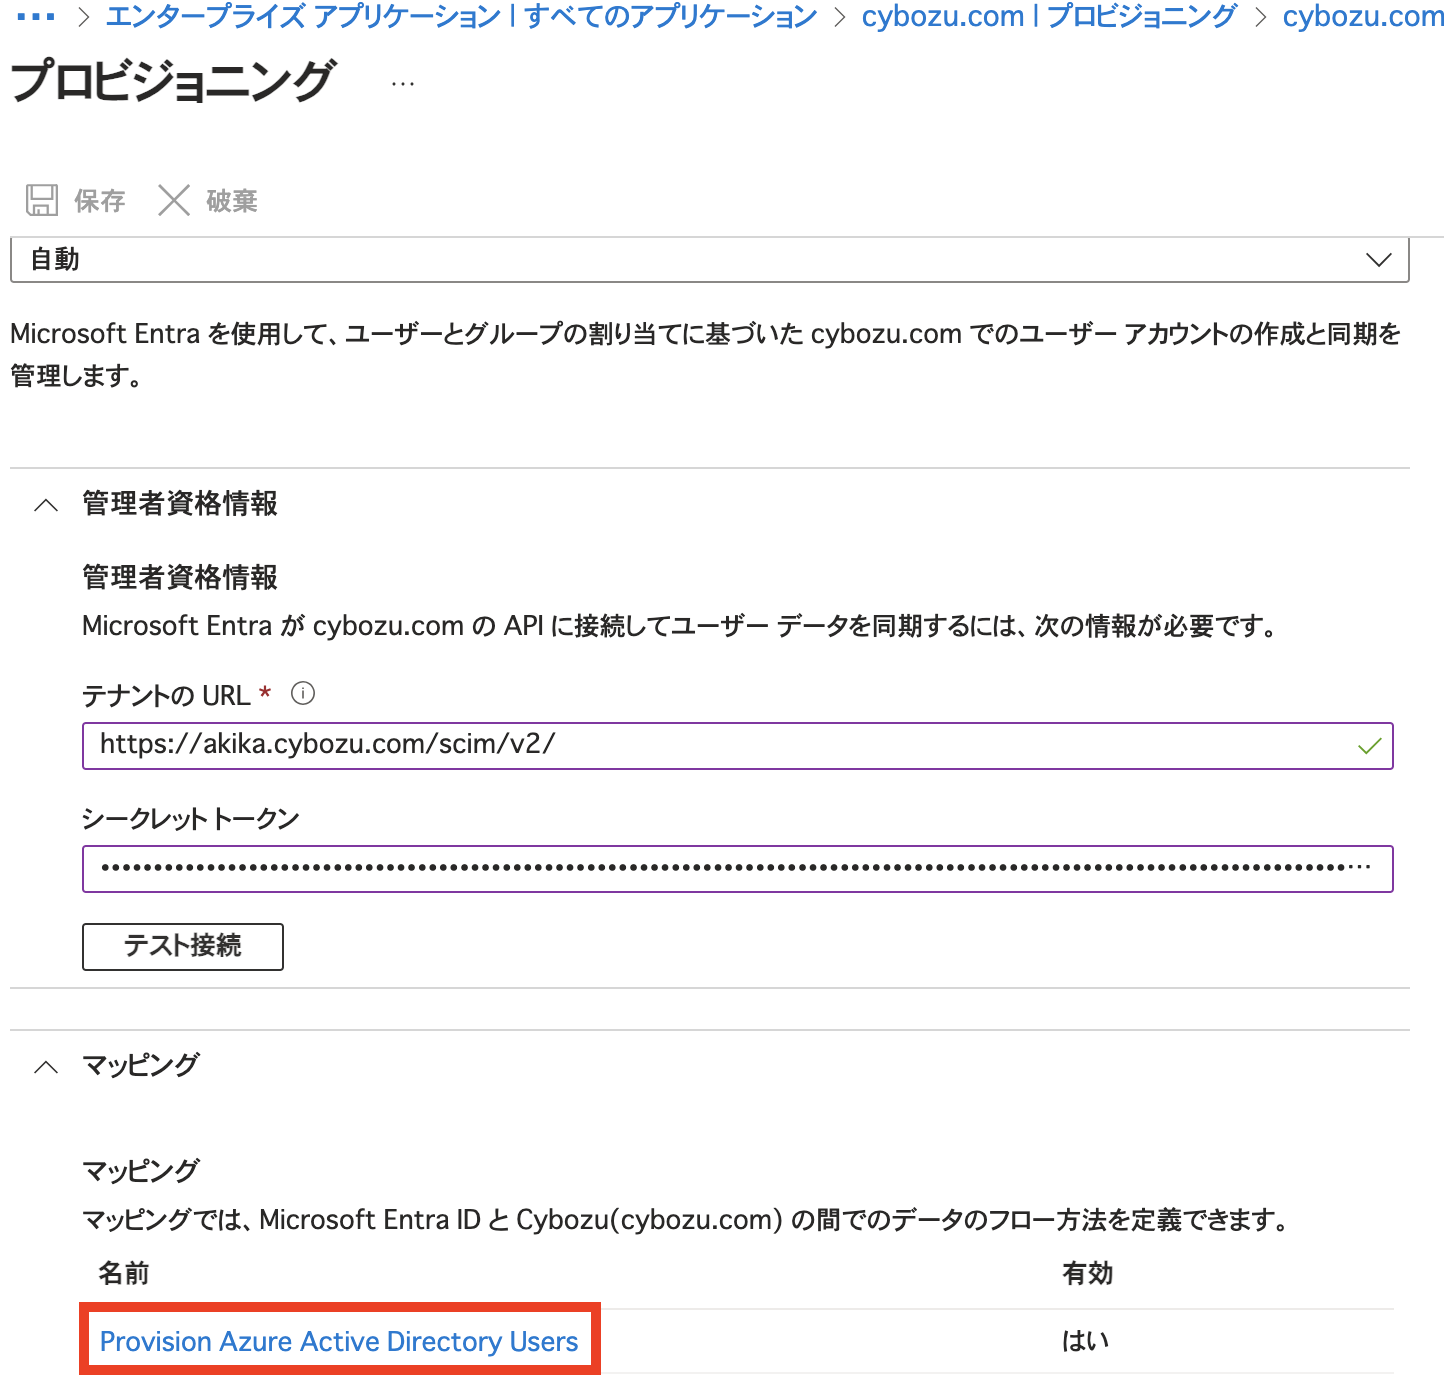 Provision Azure Active Directory Users をクリック